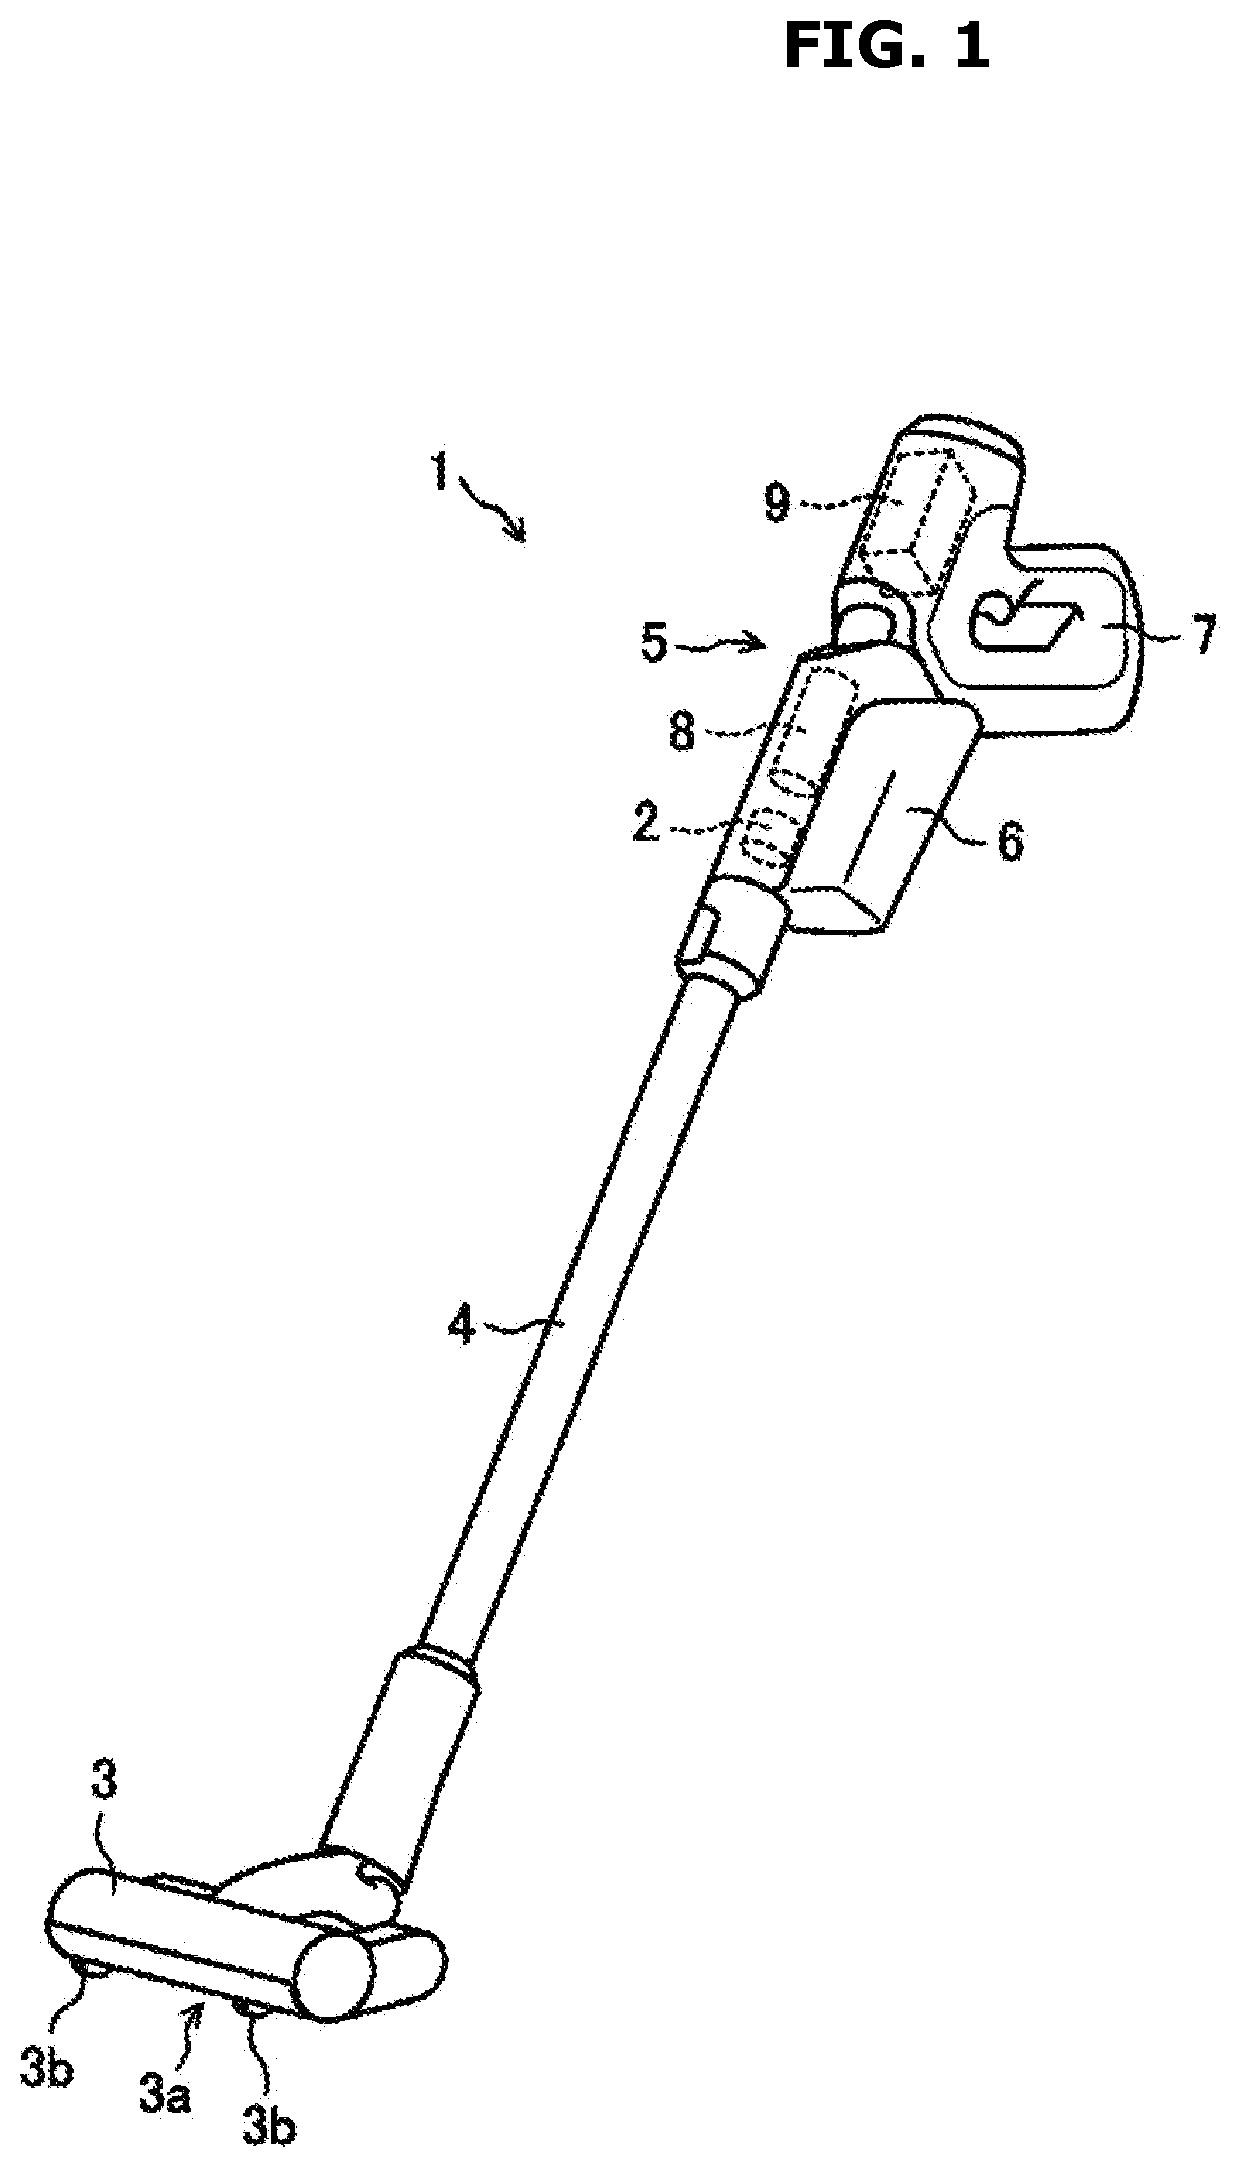 Drive motor and vacuum cleaner having the same